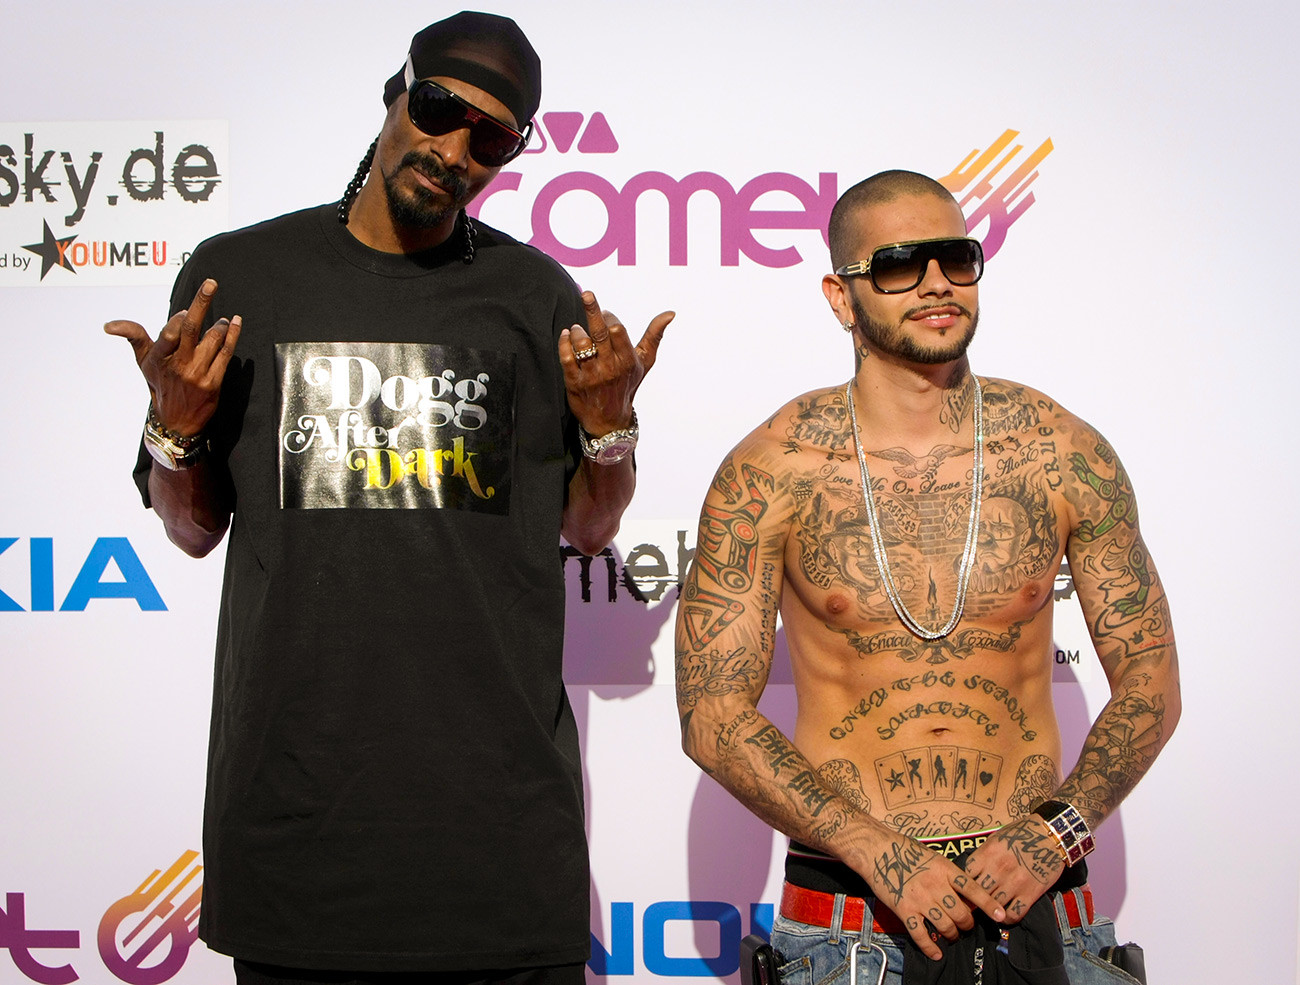 Snoop Dogg and Timati attend the Comet 2009 Awards at Koenig Pilsener Arena in Cologne, Germany